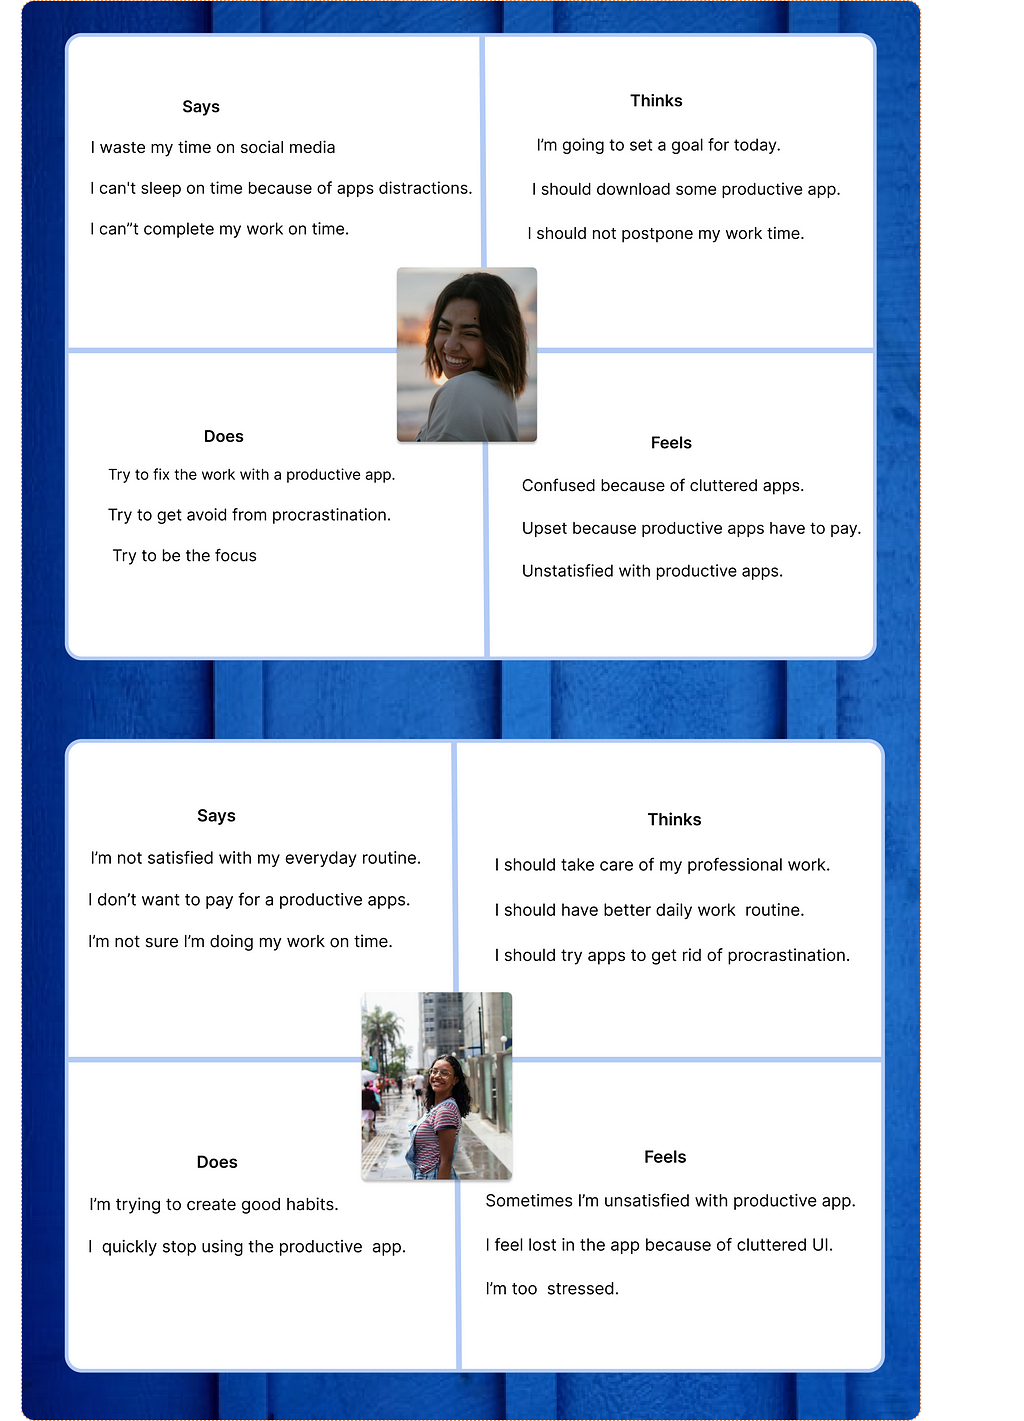 This is a image contain Empathy Mapping of Aarya Shah and Kiara Patel